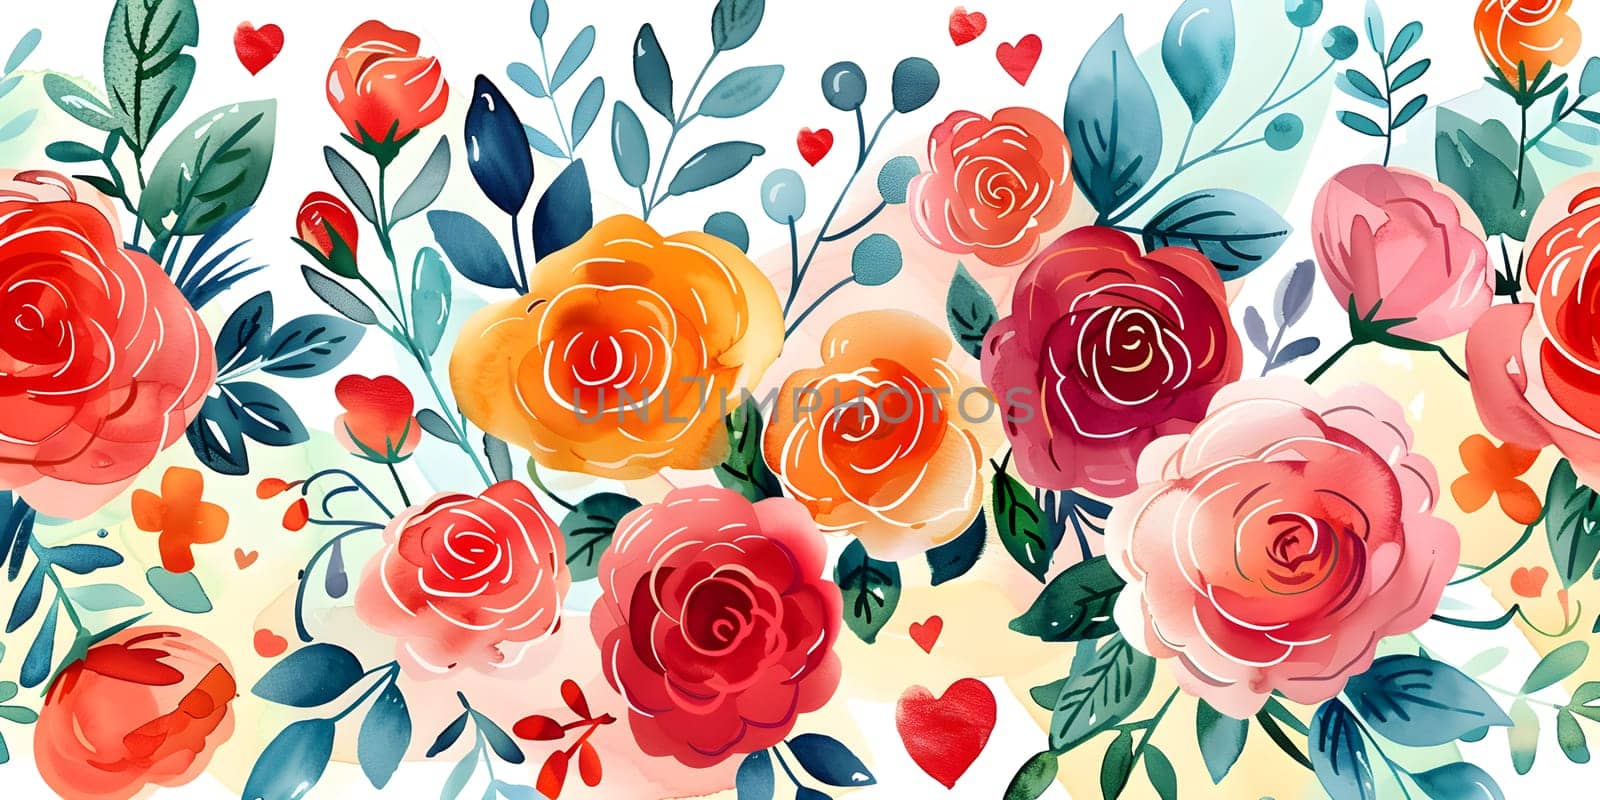 A beautiful watercolor painting of pink Hybrid tea roses and green leaves on a pristine white background, perfect for flower arranging and creative arts